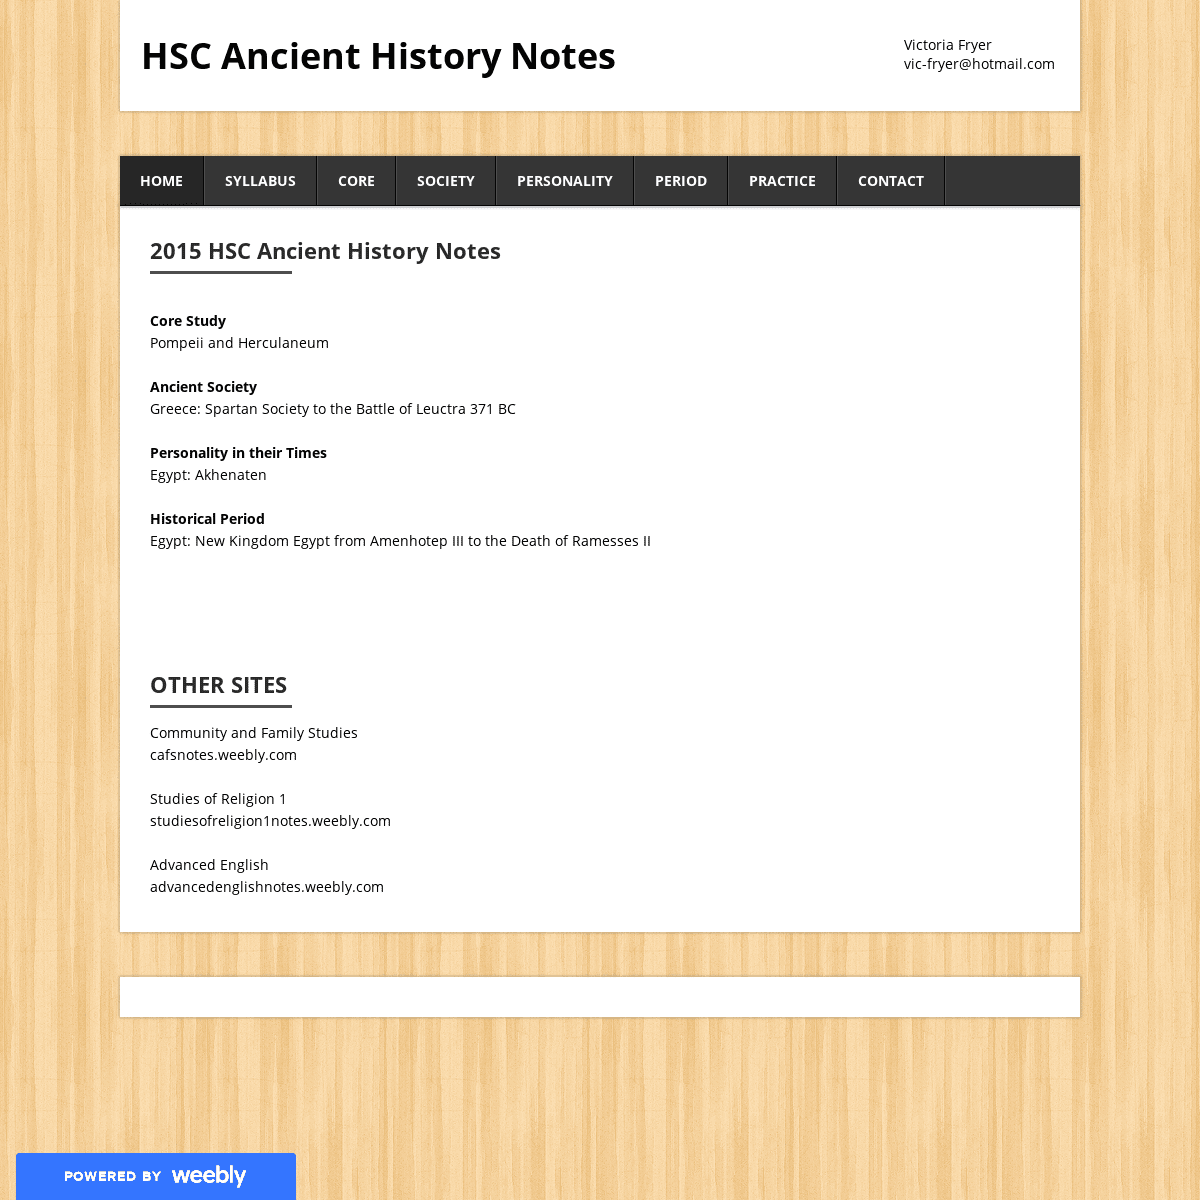 HSC Ancient History Notes - Home